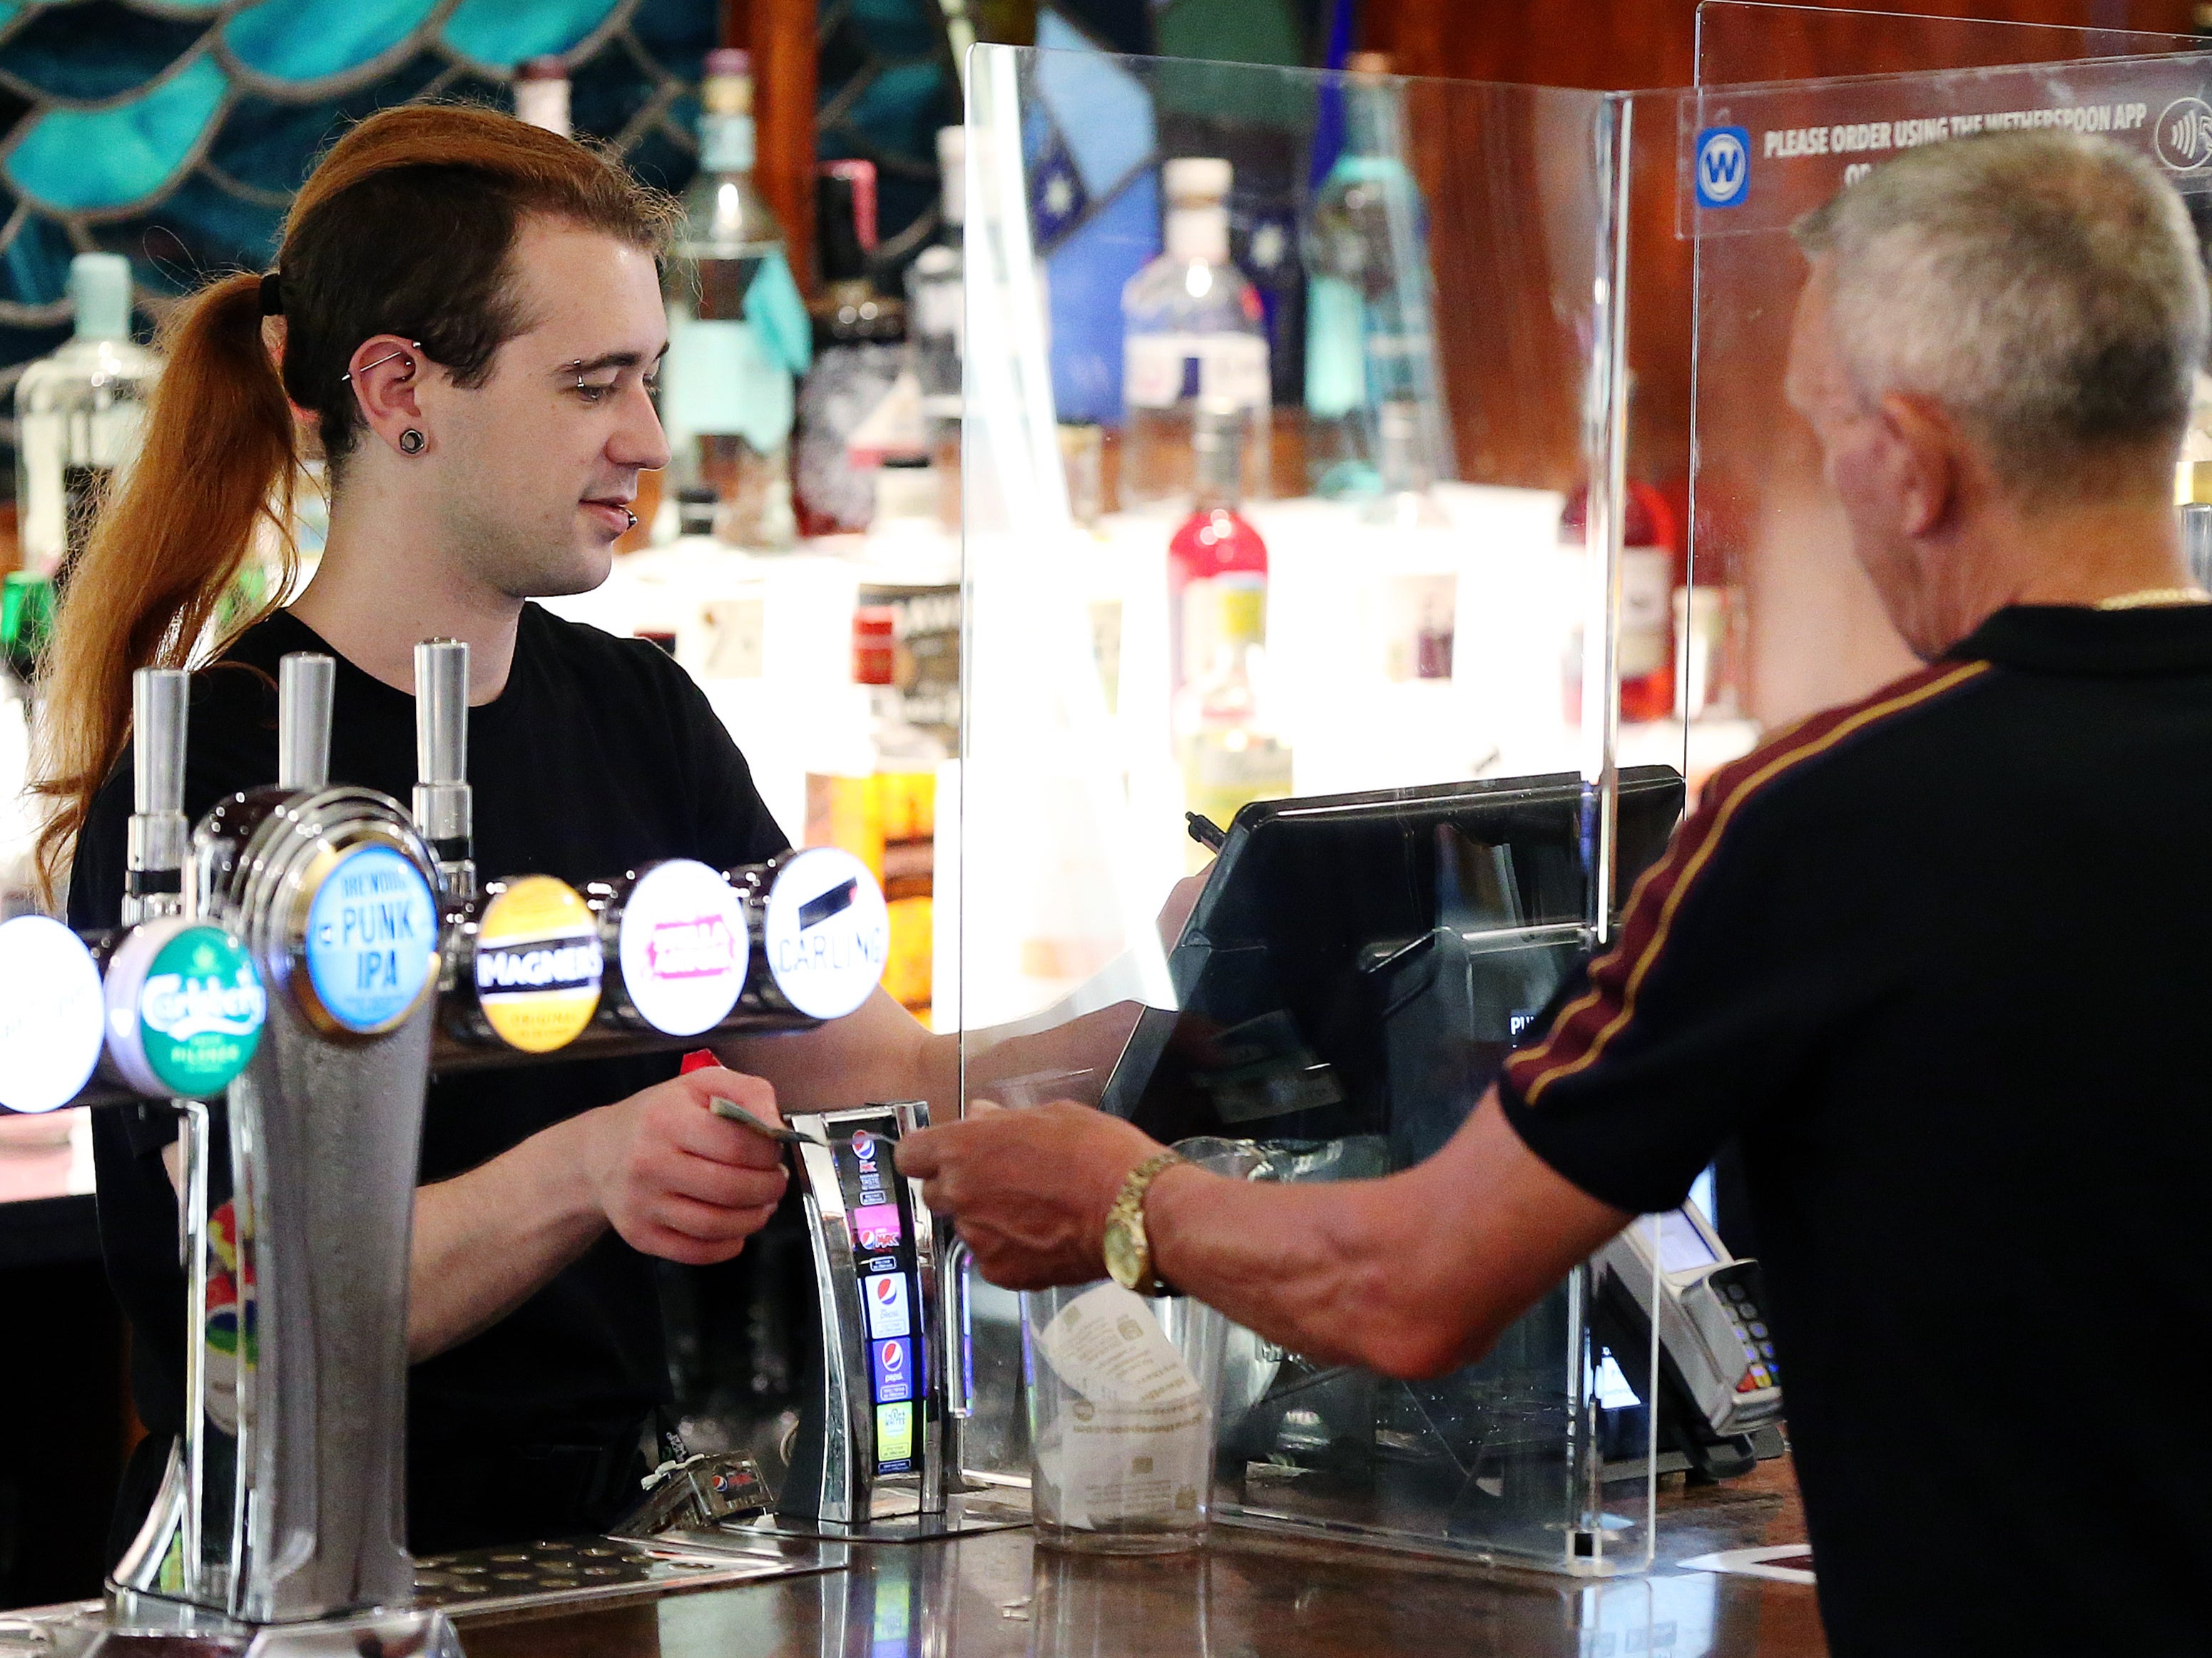 A customer hands a member of staff cash while paying for drink at a bar in Manchester, England